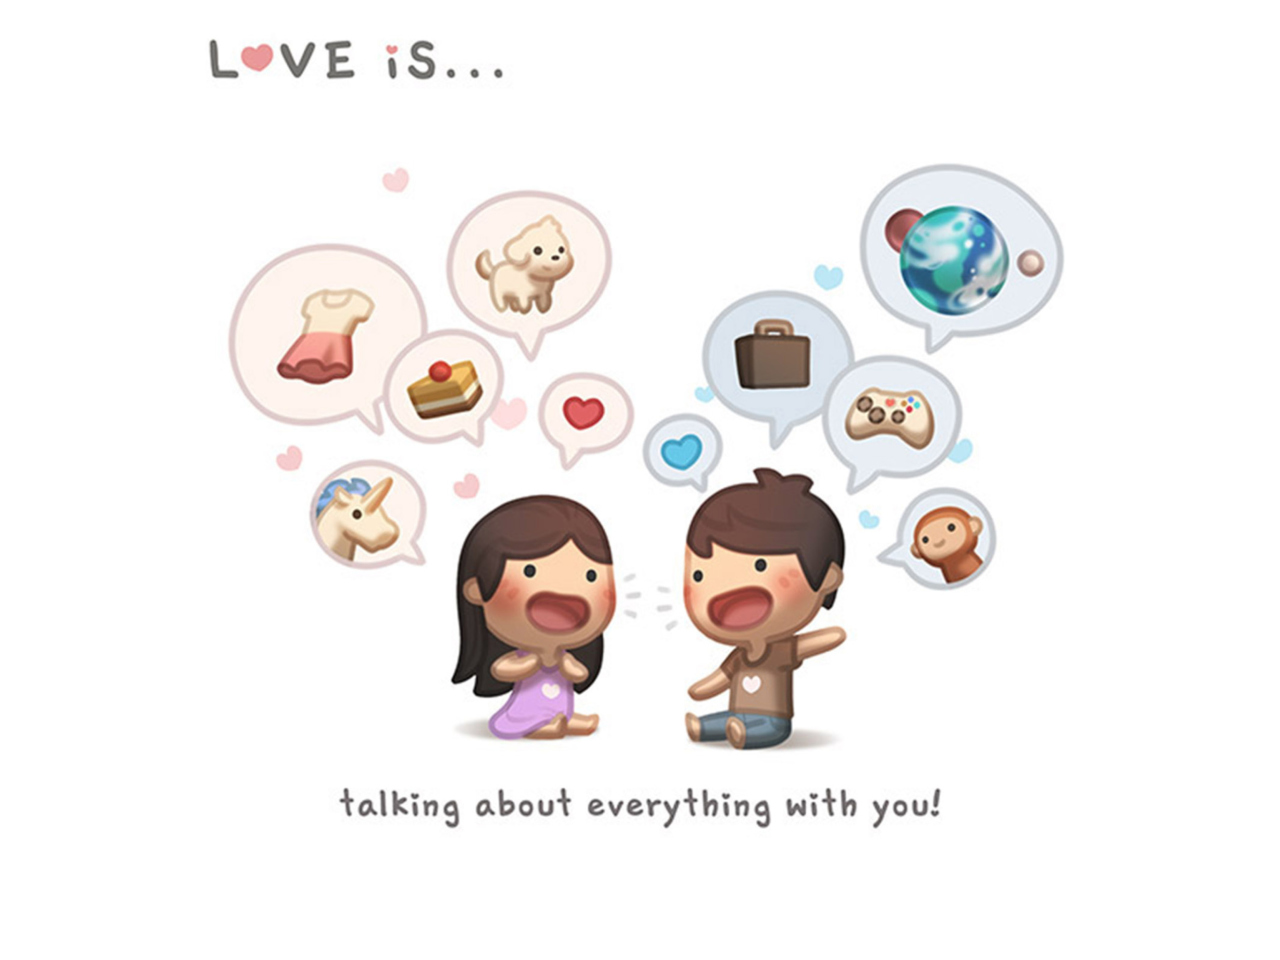 Love Is - Talking About Everything With You screenshot #1 1280x960